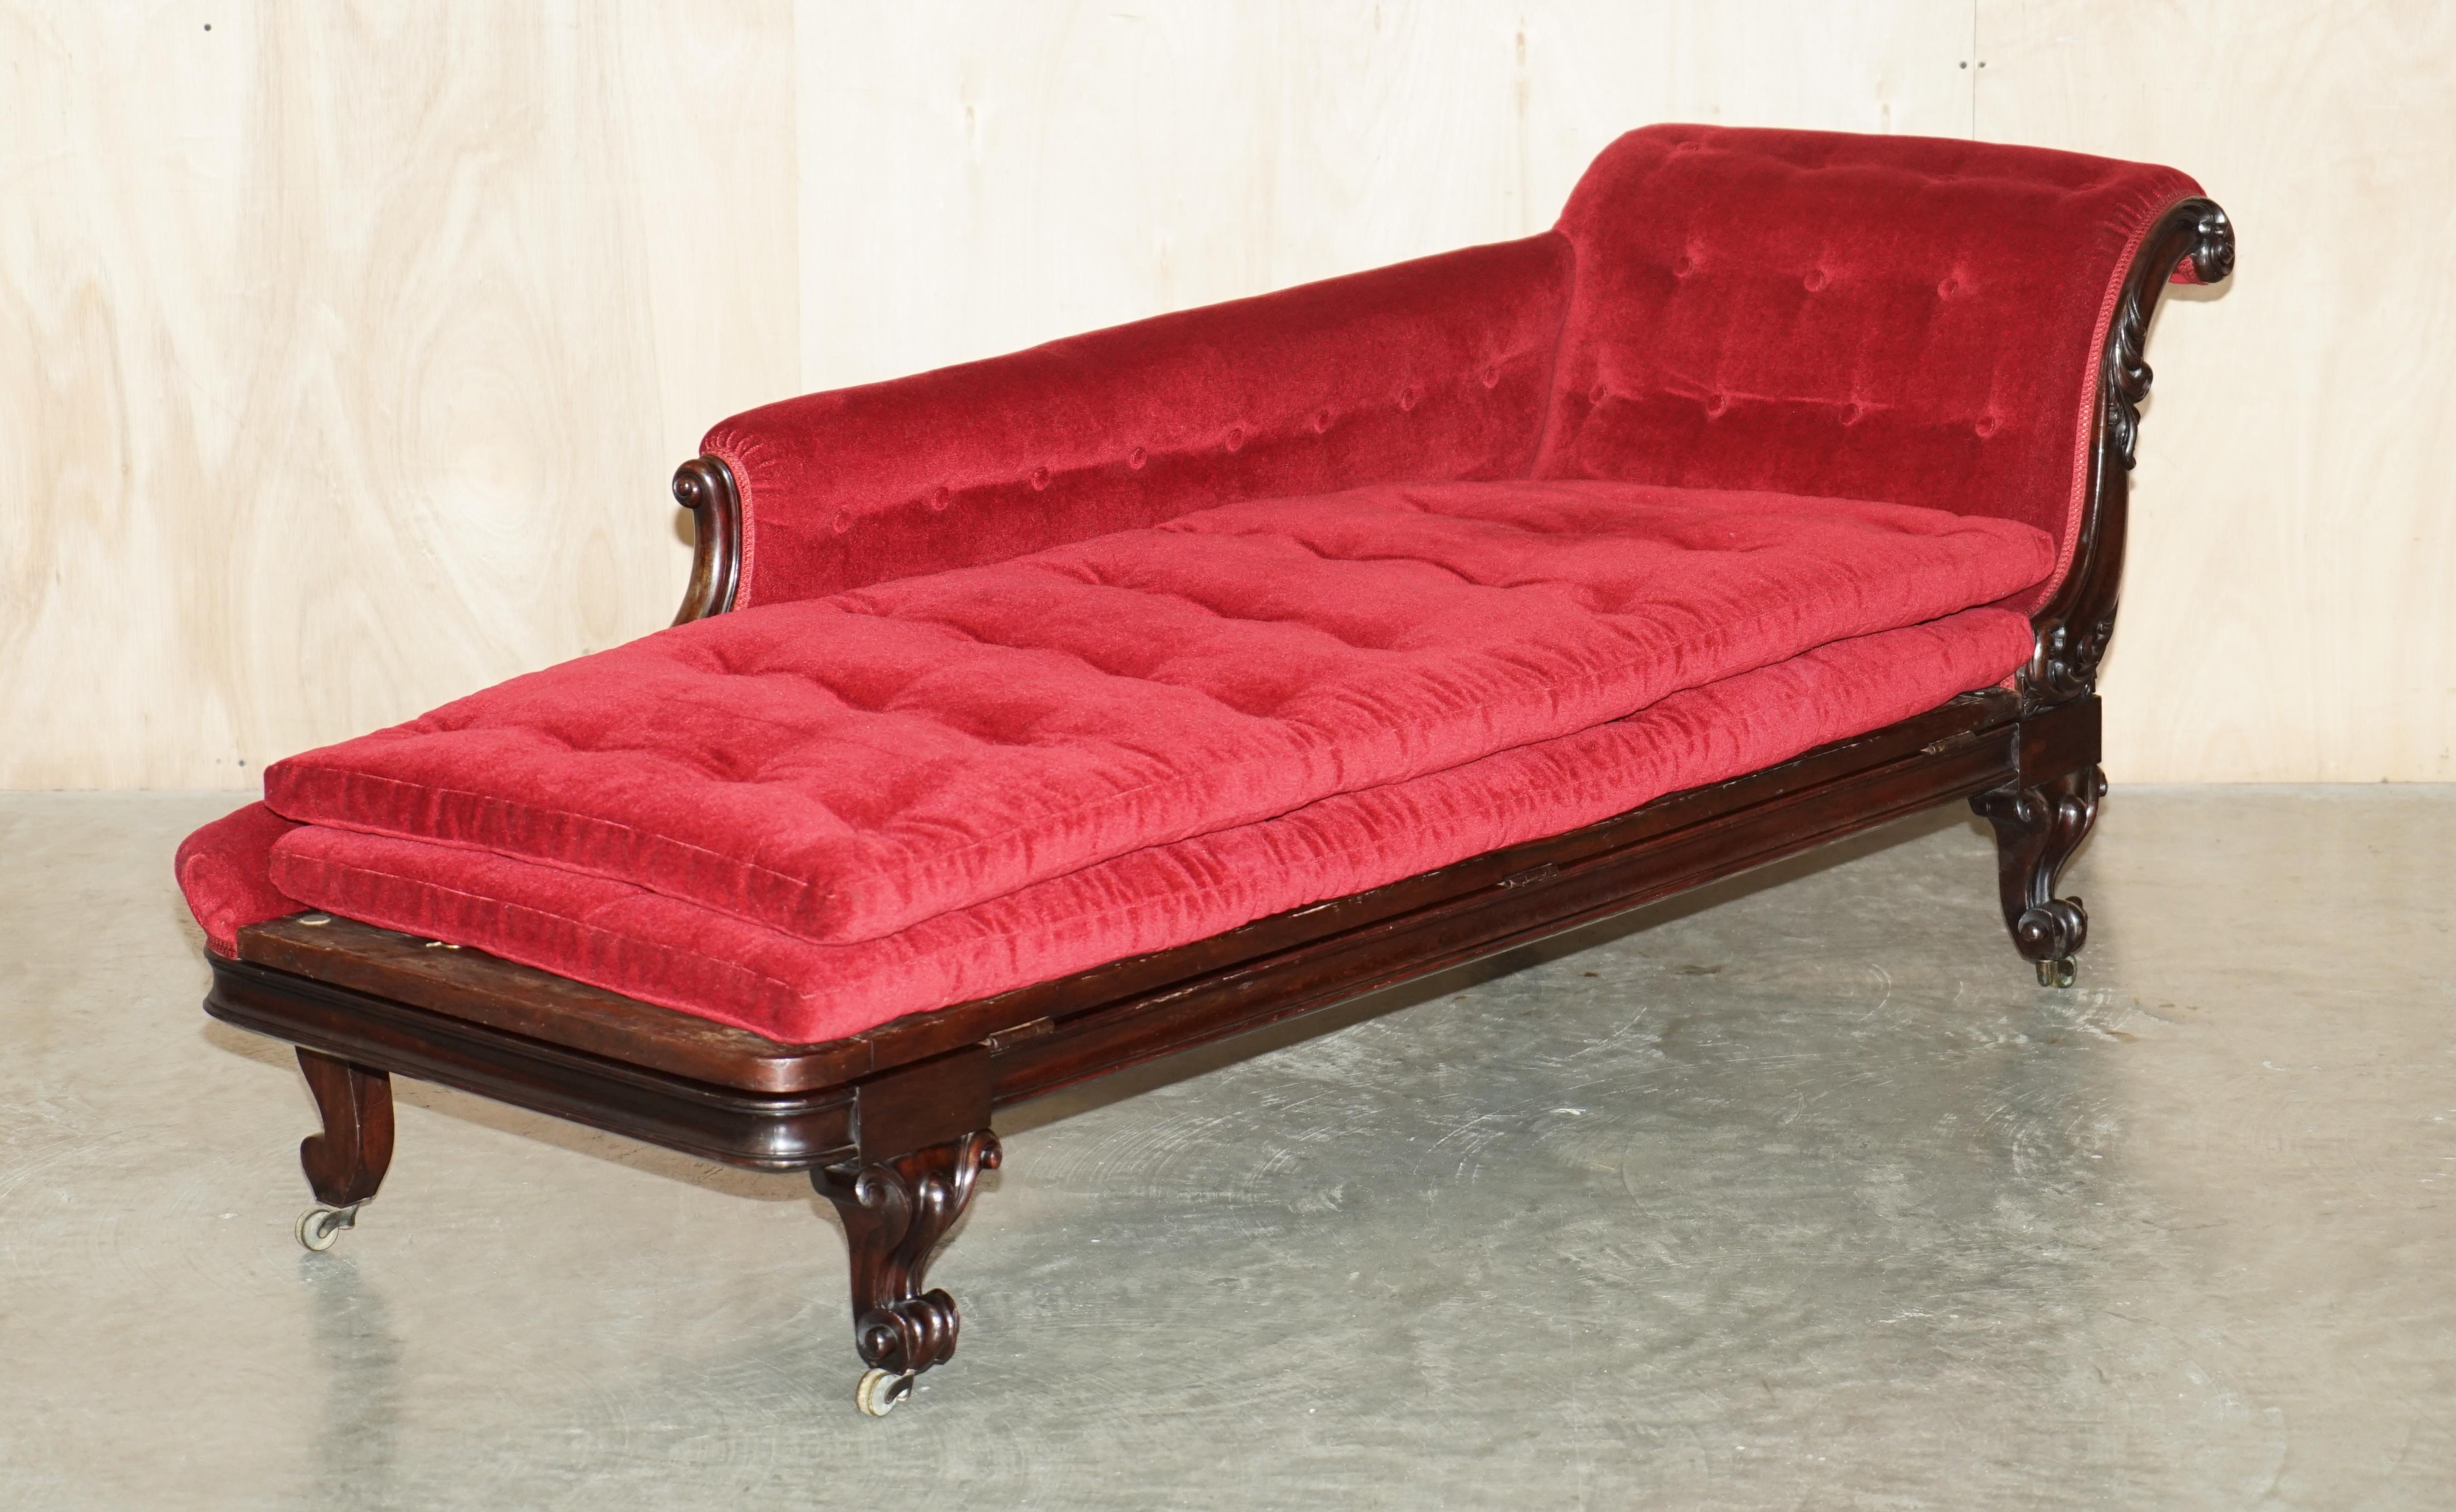 We are delighted to offer for sale this exquisite antique circa 1830 English hand carved Mahogany William IV extending Chaise Lounge with Chesterfield tufting.

This Chaise Lounge is an absolute ten, I have never seen another of its type